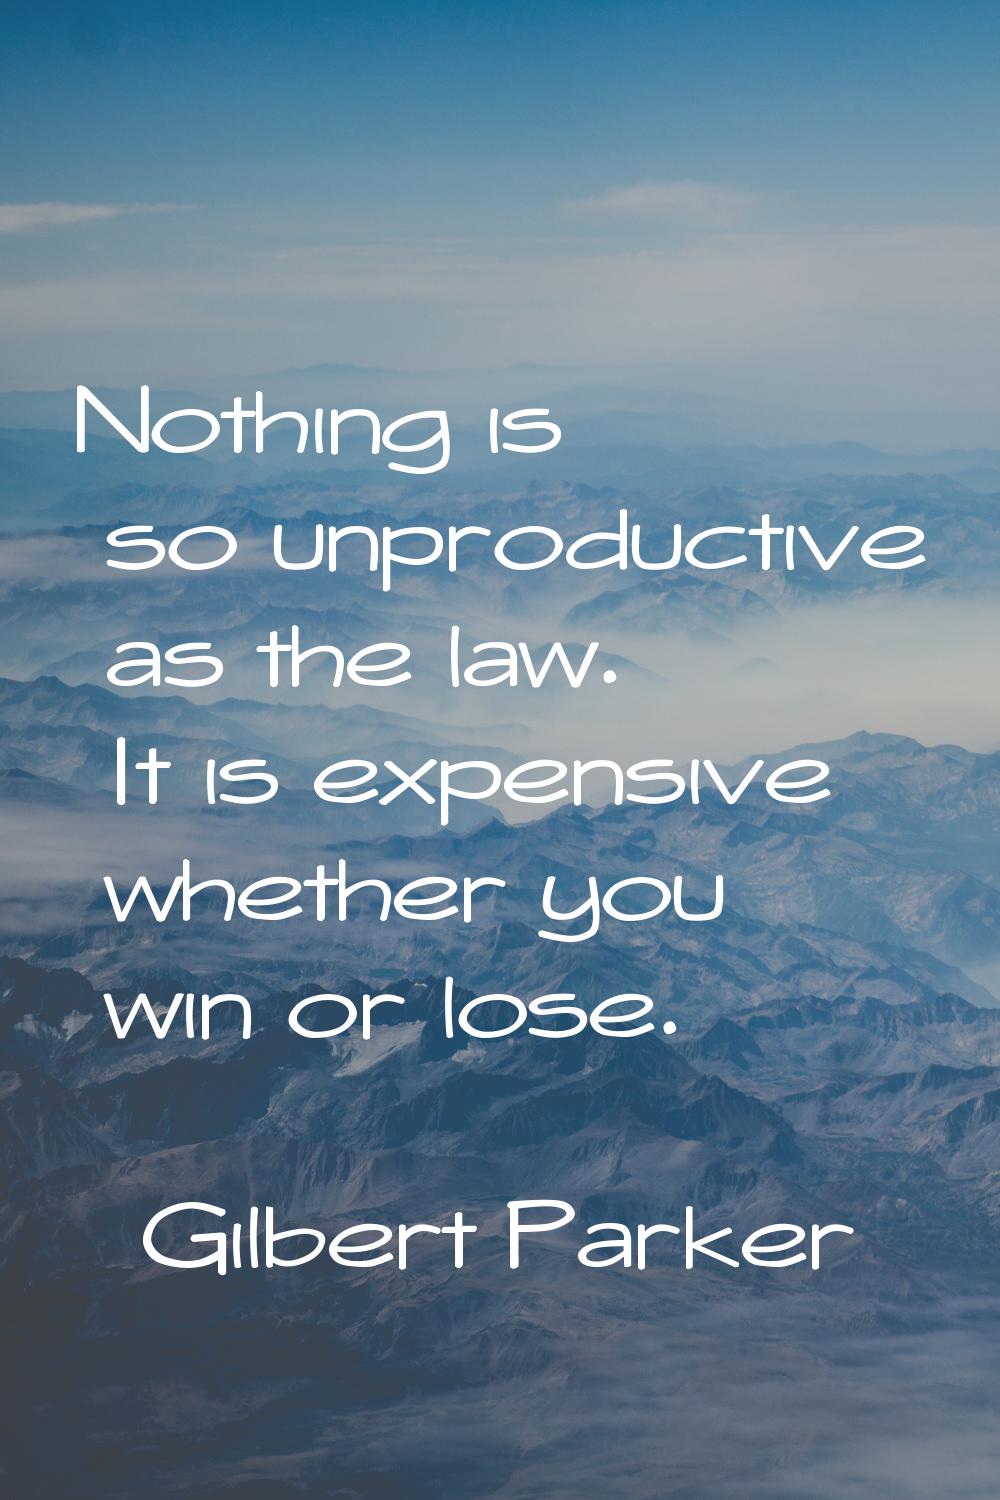 Nothing is so unproductive as the law. It is expensive whether you win or lose.